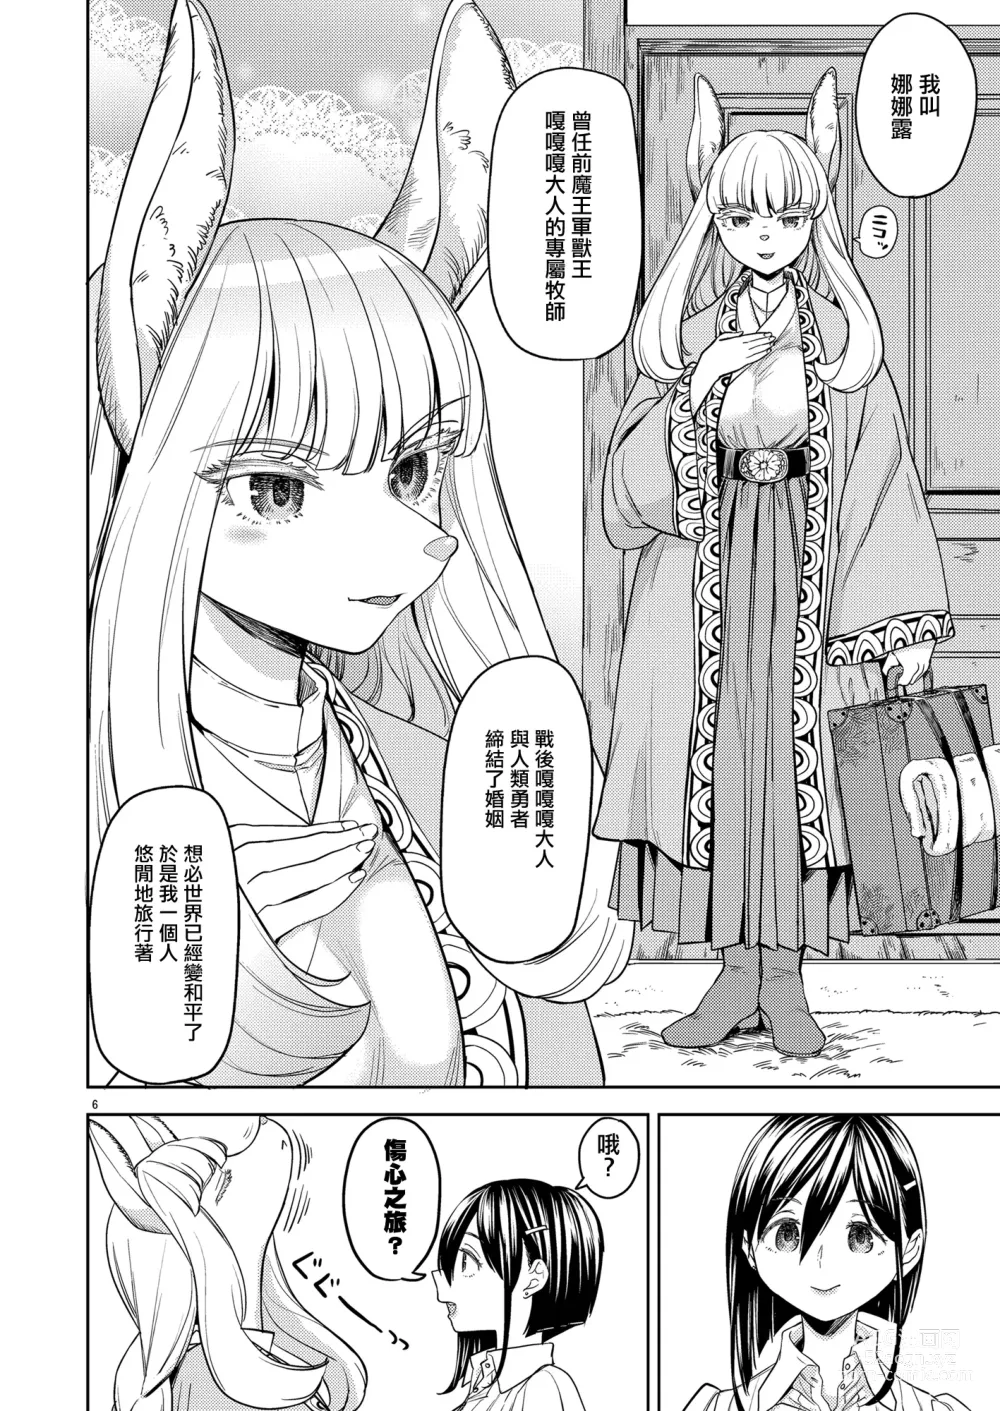 Page 10 of doujinshi 來一場蜜月旅行